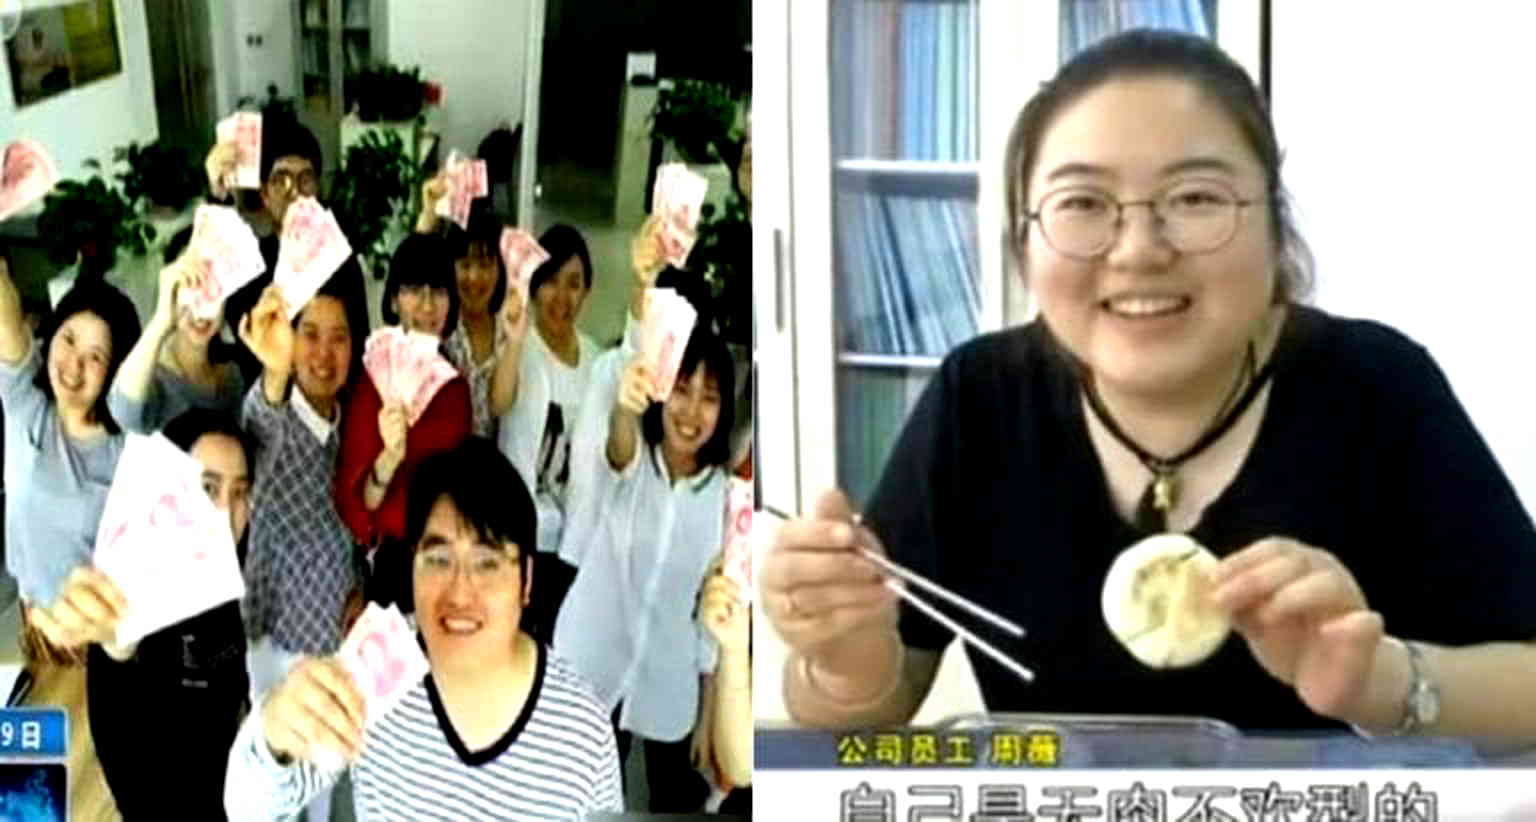 Chinese Boss Pays Employees $14 For Every 2 Pounds They Lose